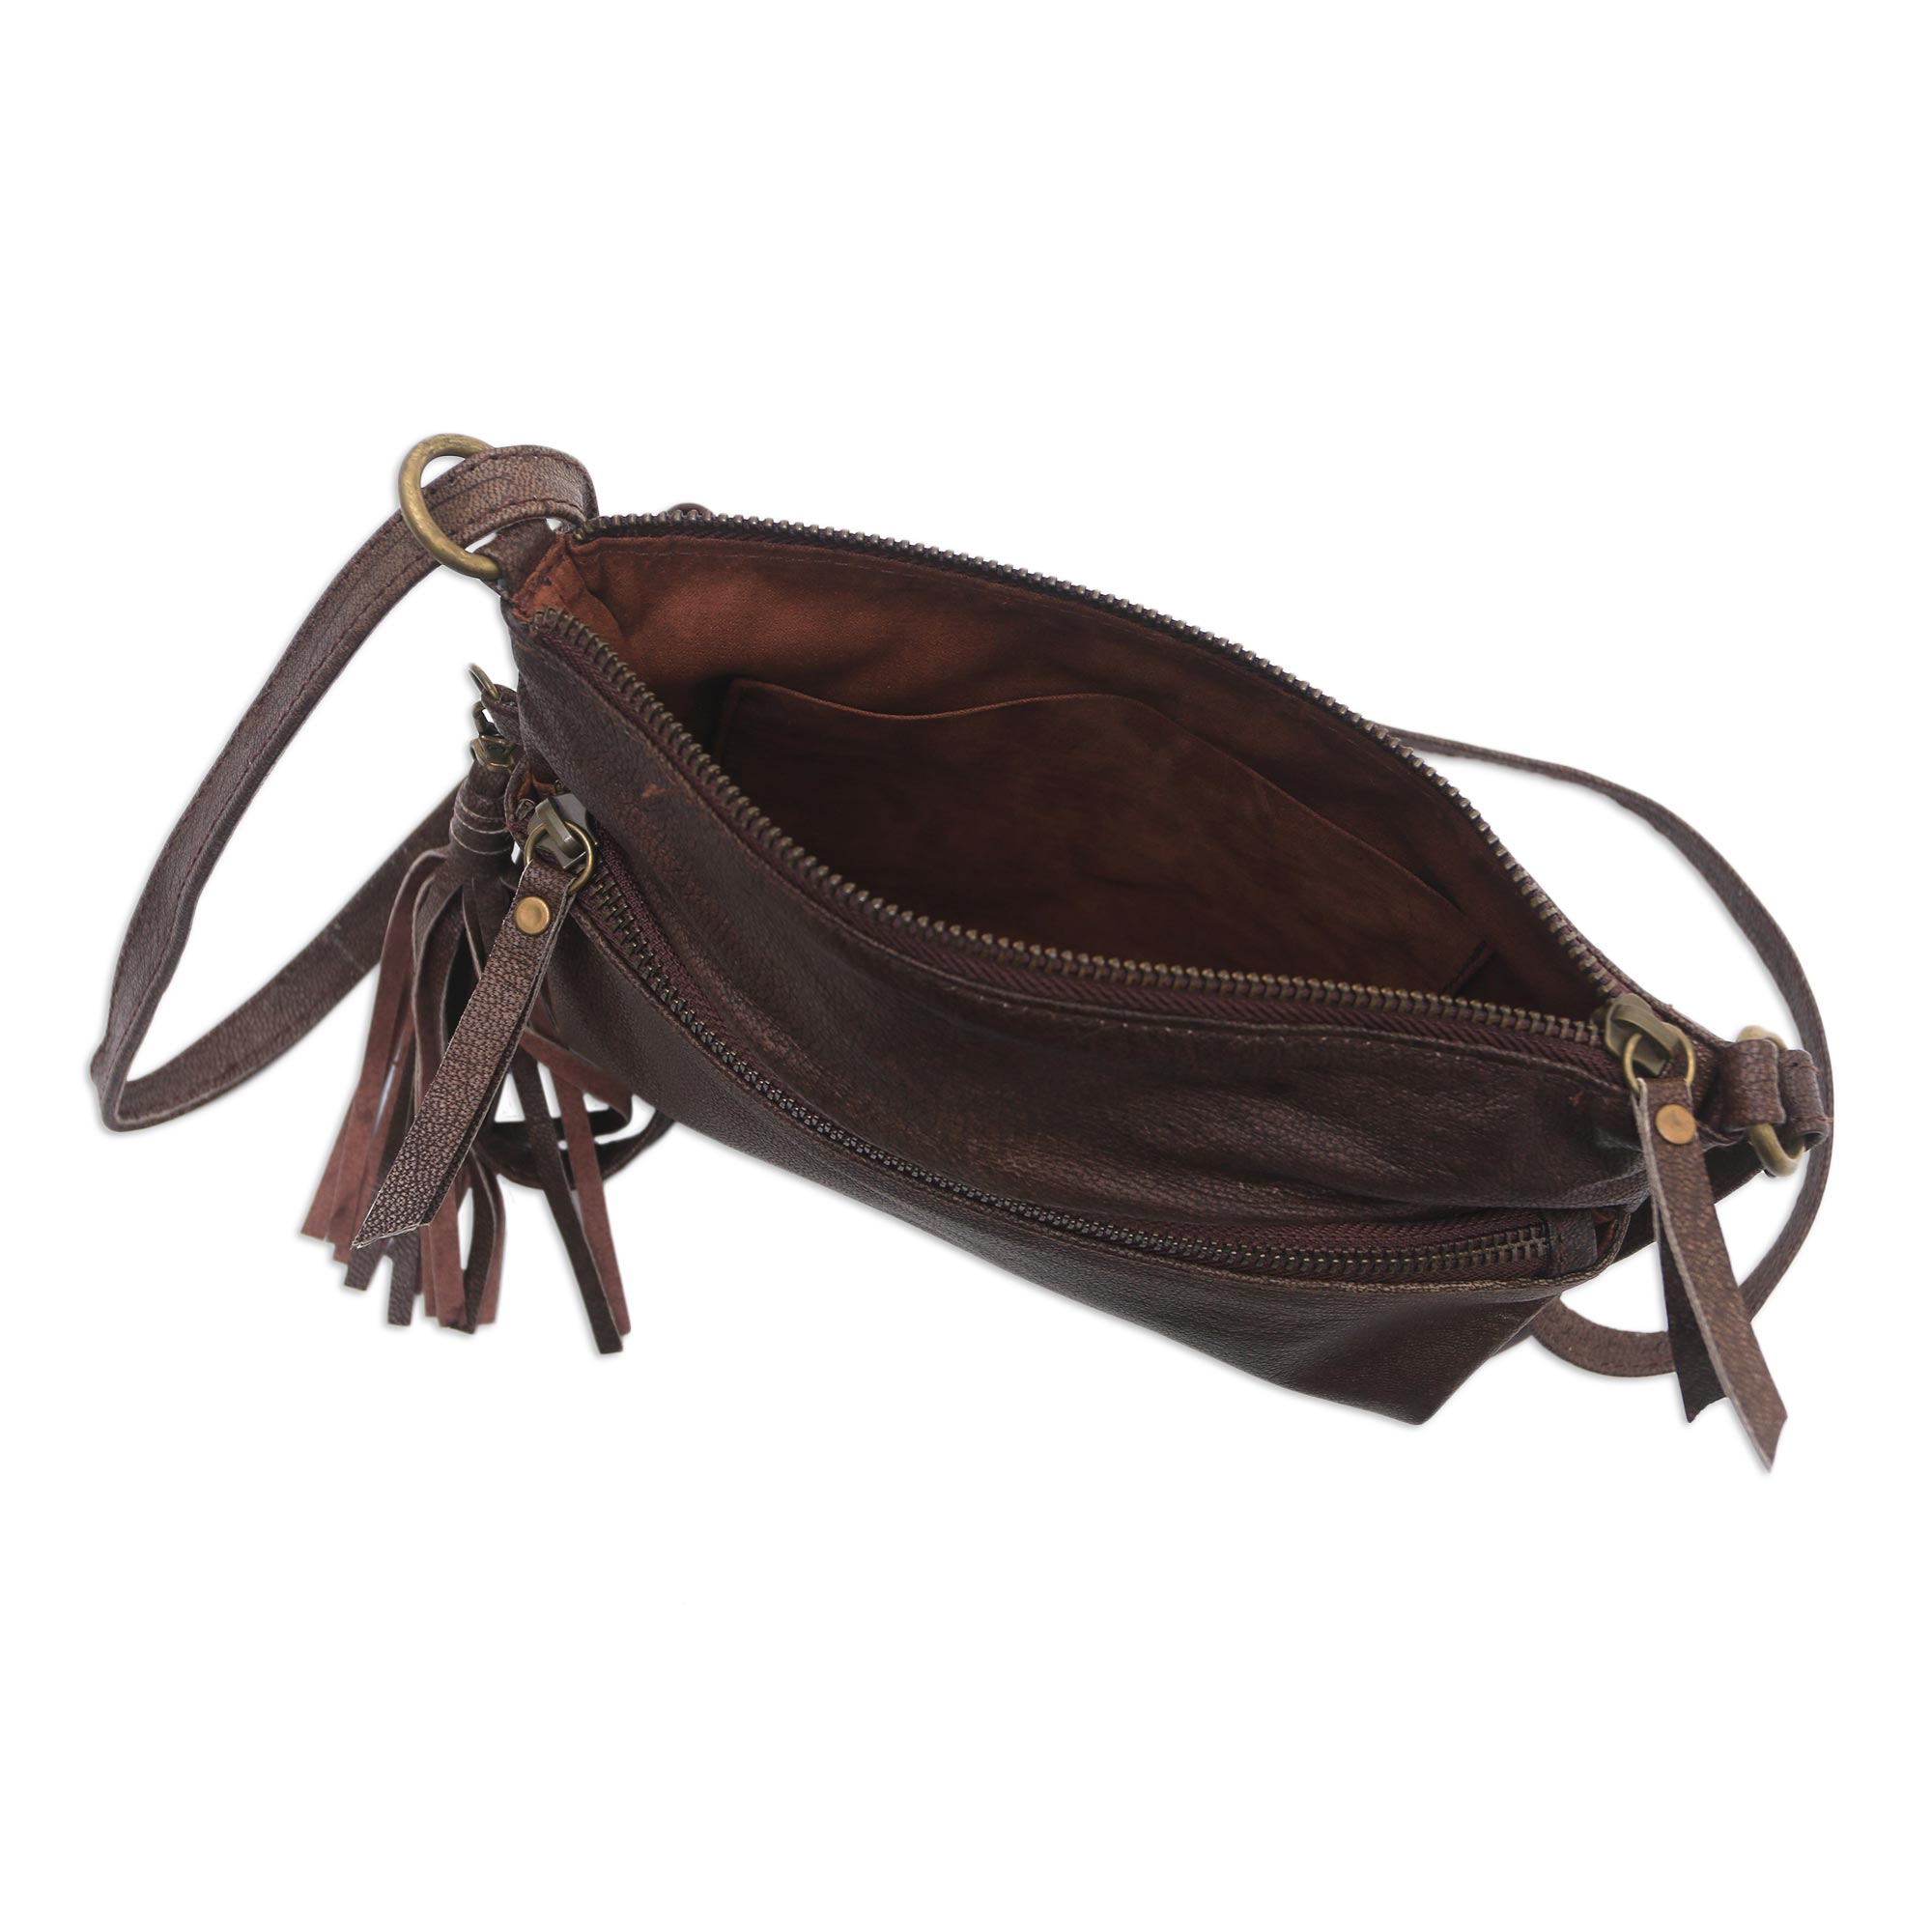 Artisan Crafted Leather Sling in Mahogany from Bali - Vintage Pouch in ...